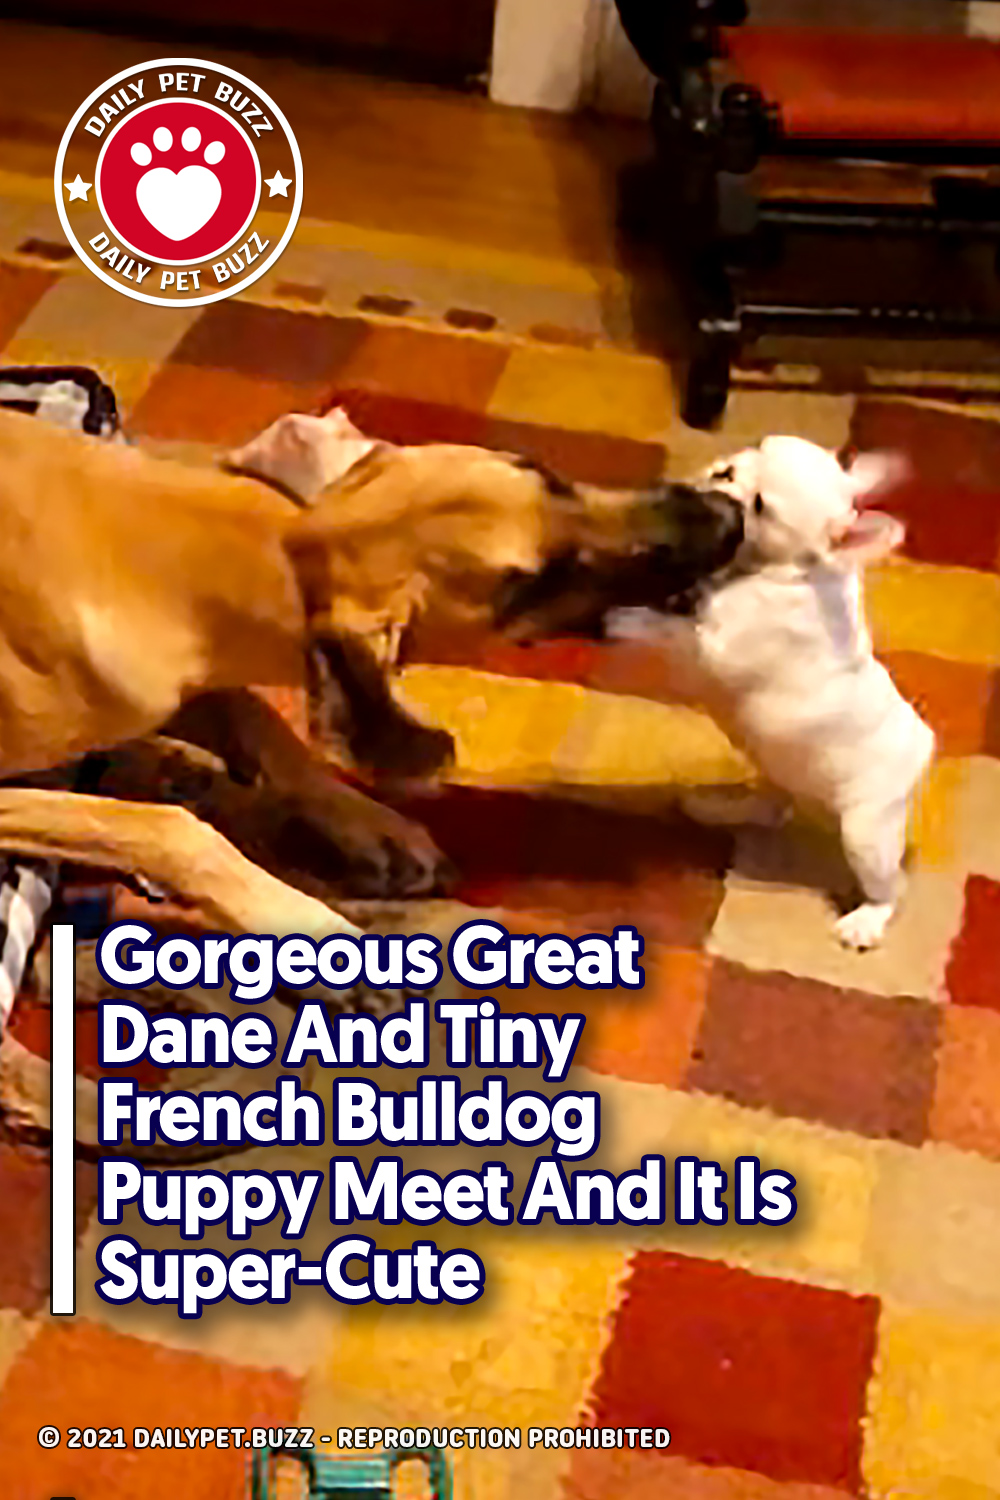 Gorgeous Great Dane And Tiny French Bulldog Puppy Meet And It Is Super-Cute